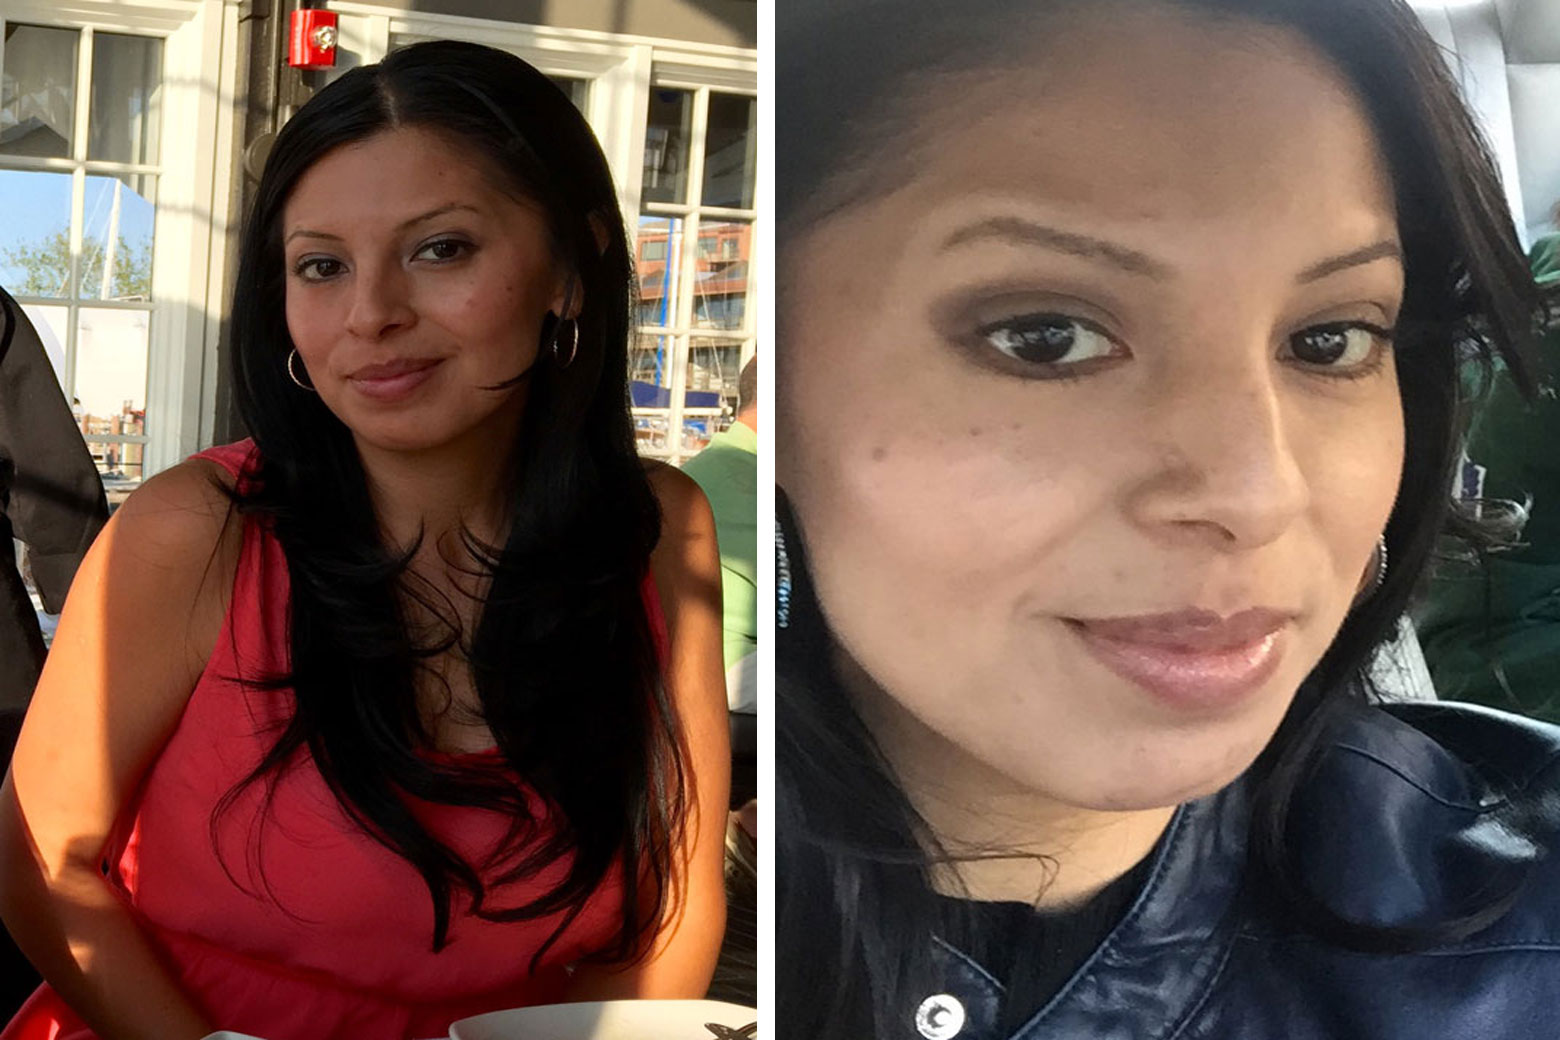 Body found is believed to be missing Va. woman